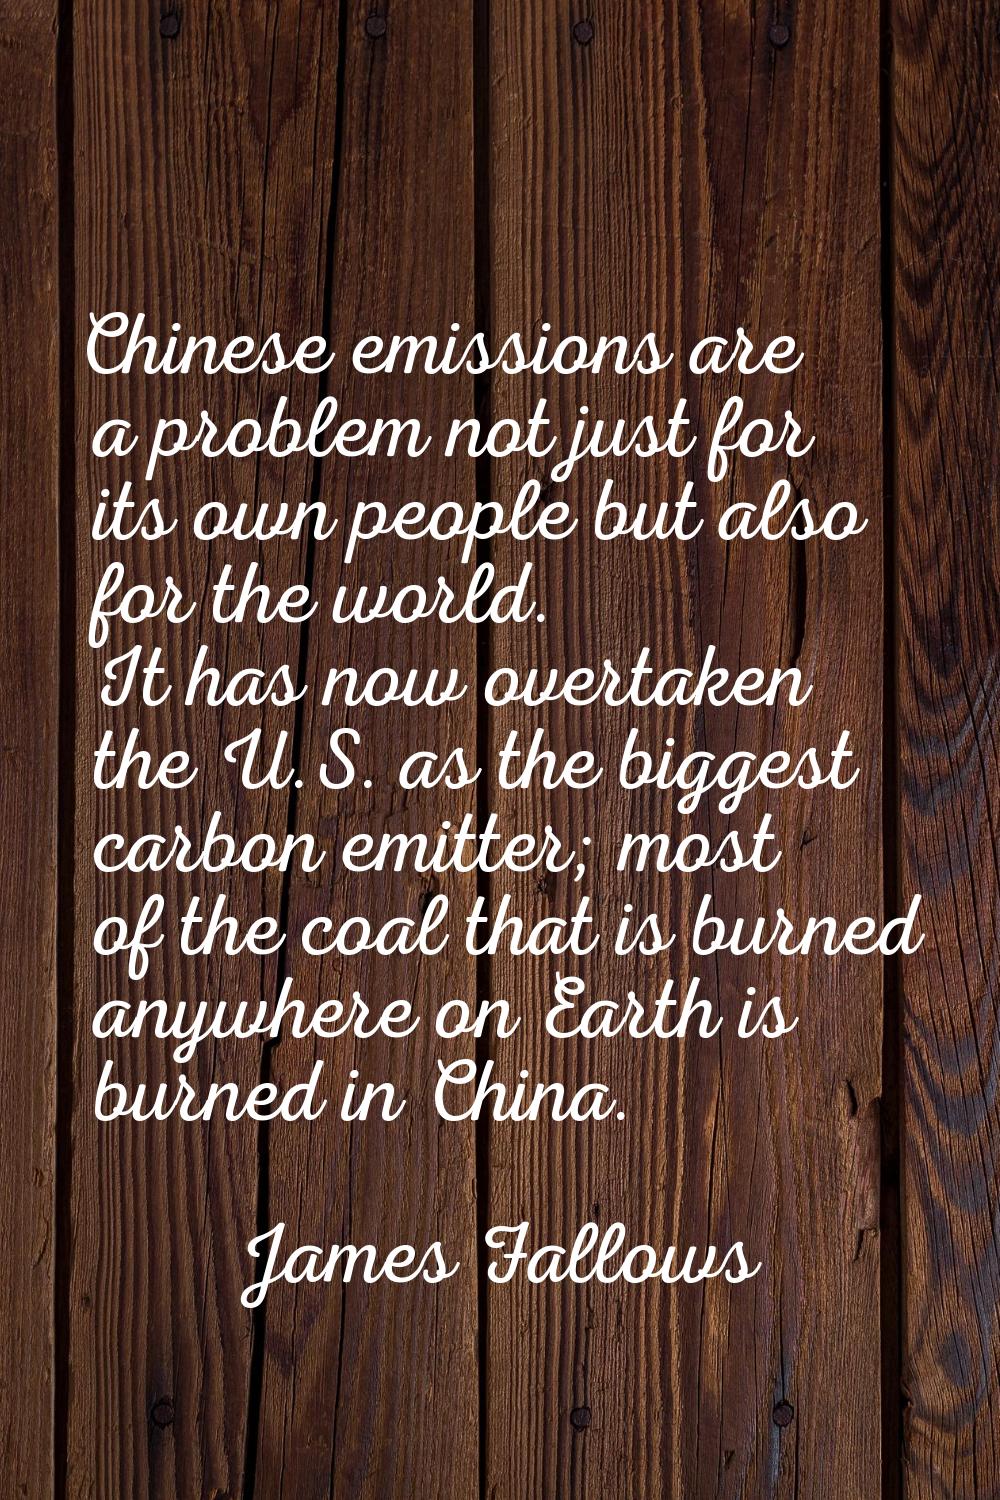 Chinese emissions are a problem not just for its own people but also for the world. It has now over